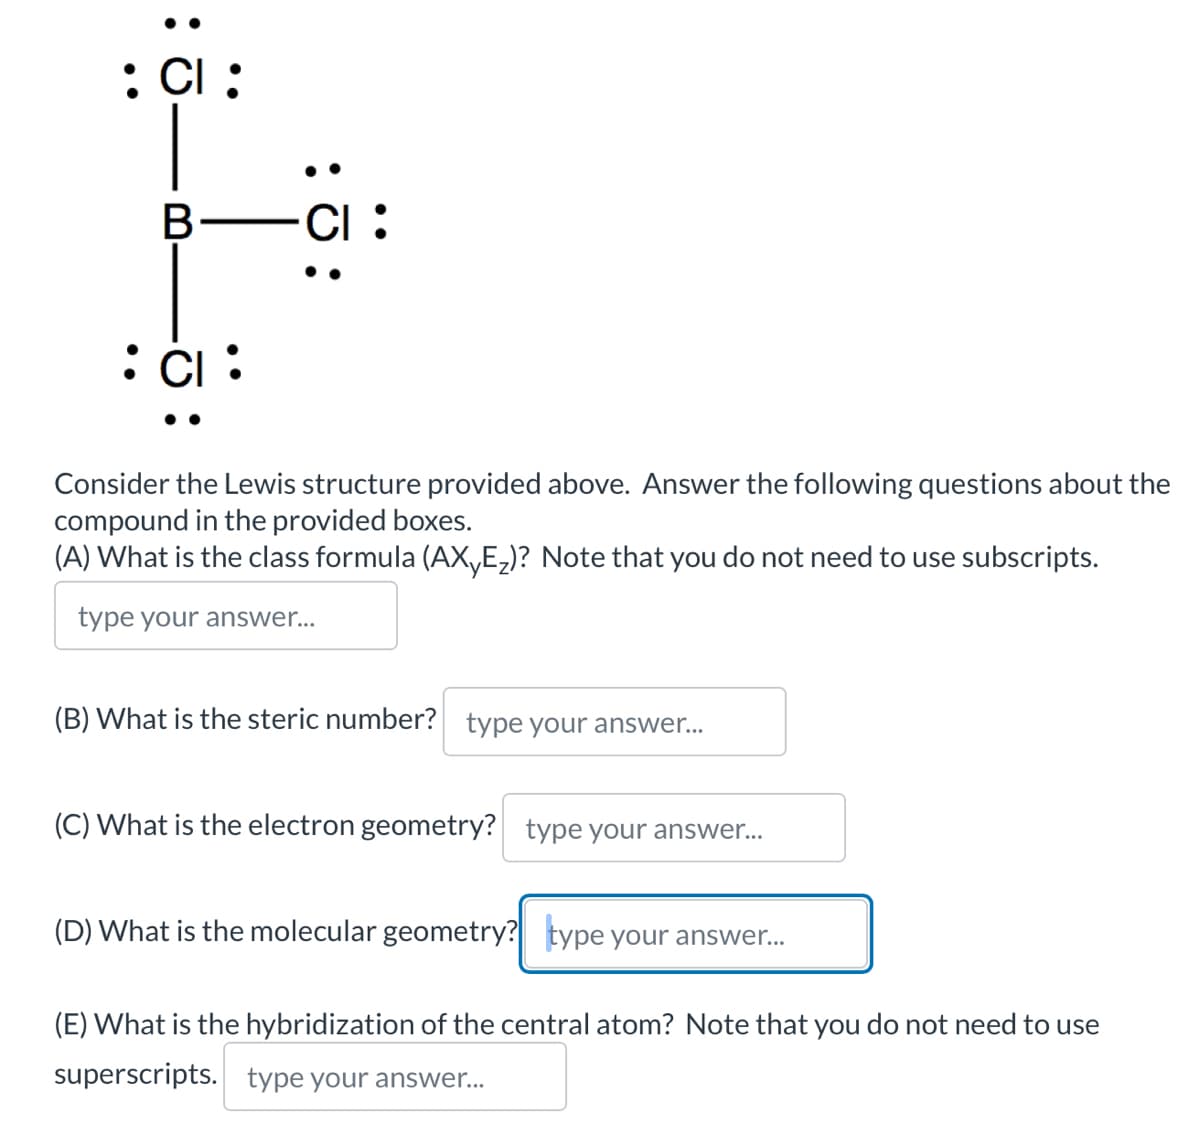 : CI:
B-CI:
: 0:
: CI:
Consider the Lewis structure provided above. Answer the following questions about the
compound in the provided boxes.
(A) What is the class formula (AX₁E₂)? Note that you do not need to use subscripts.
type your answer...
(B) What is the steric number? type your answer...
(C) What is the electron geometry? type your answer...
(D) What is the molecular geometry? type your answer...
(E) What is the hybridization of the central atom? Note that you do not need to use
superscripts. type your answer...